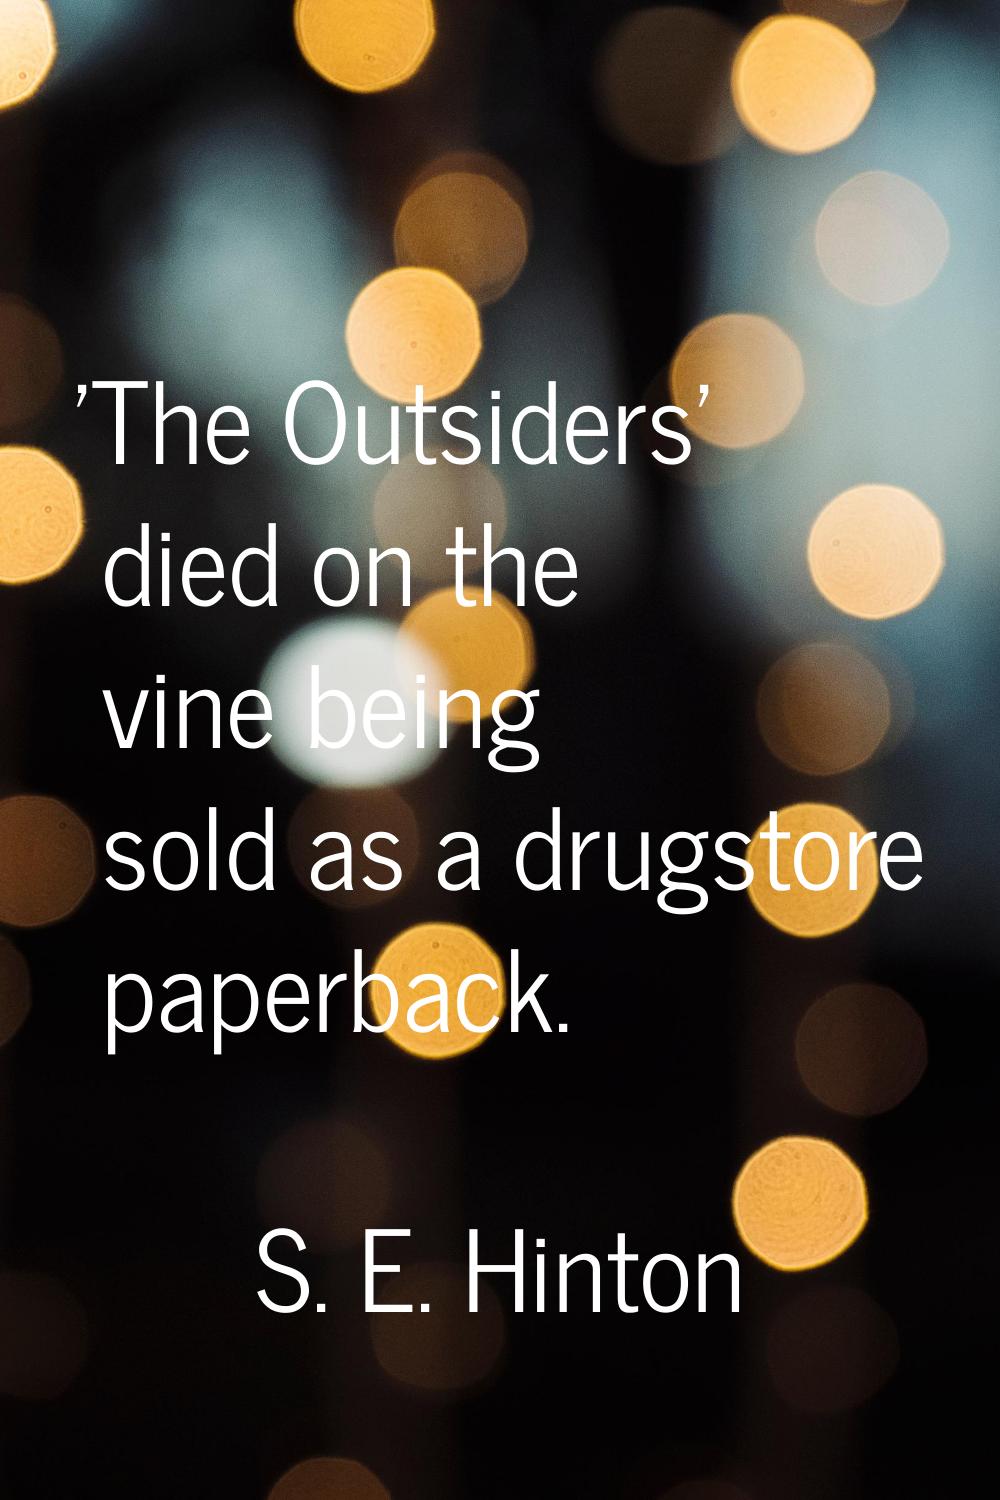 'The Outsiders' died on the vine being sold as a drugstore paperback.